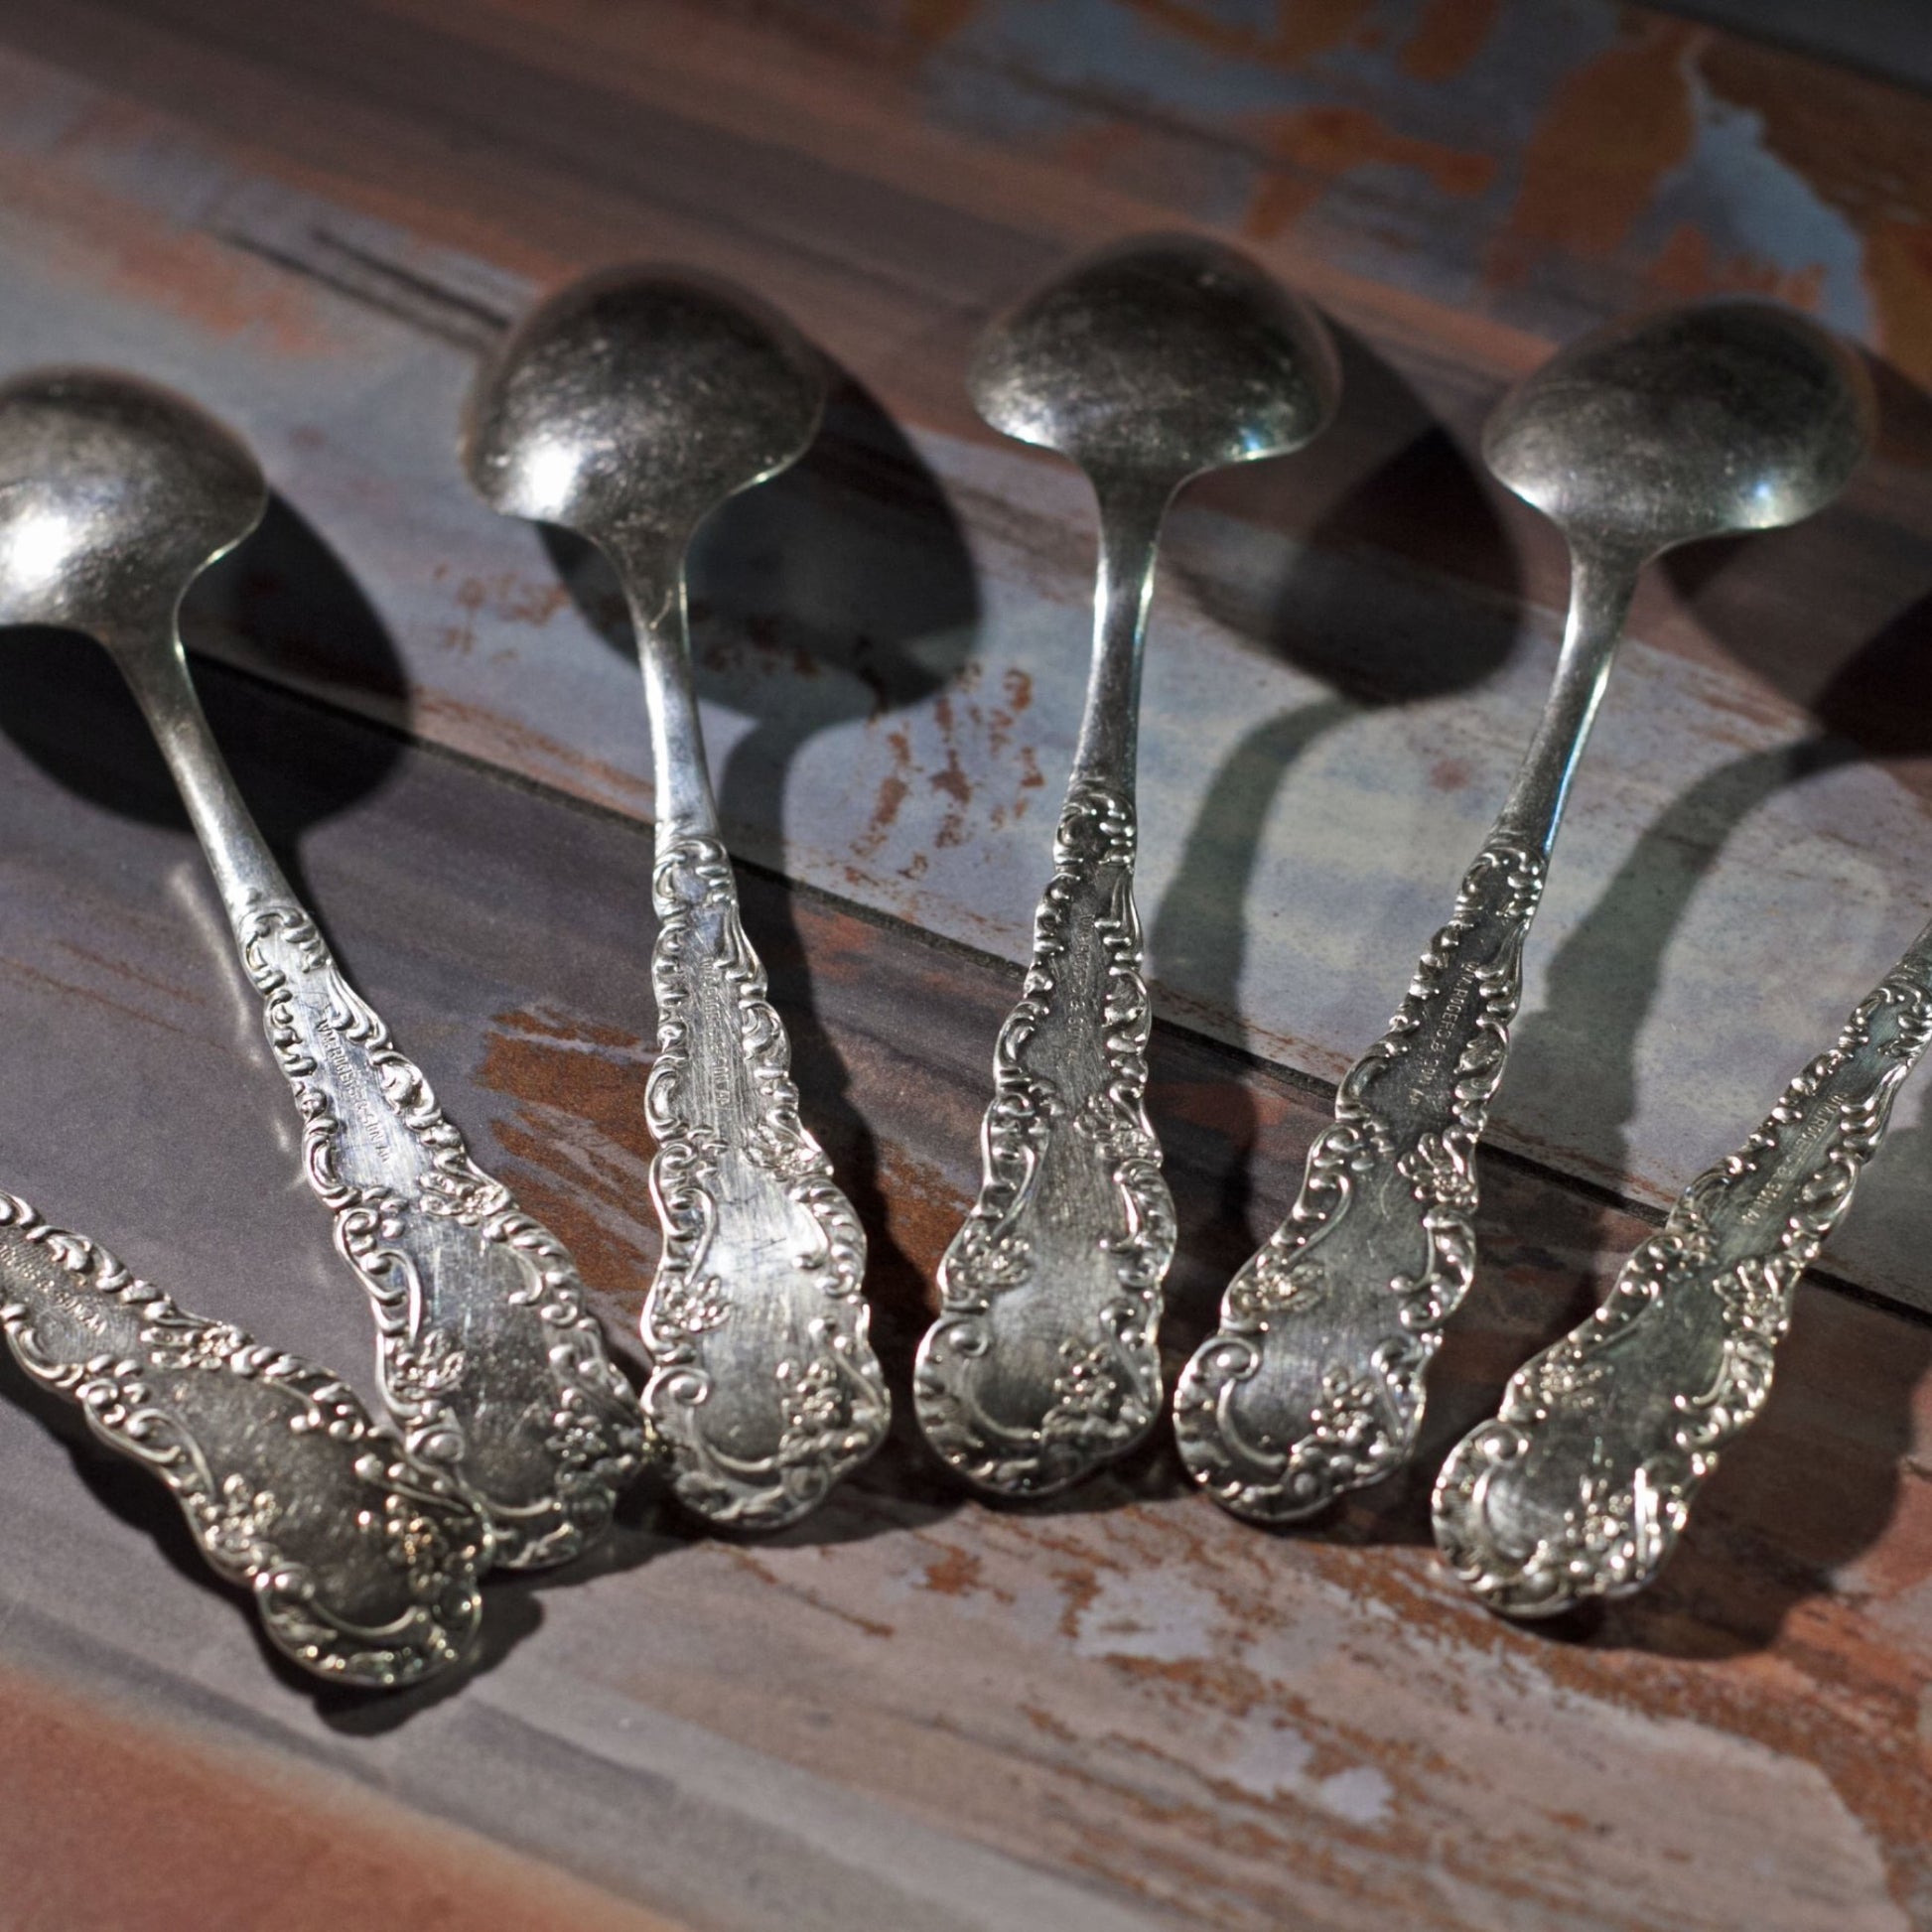 FLORIDA SILVER PLATE TEASPOONS by William Rogers and Son Set of Six (6)